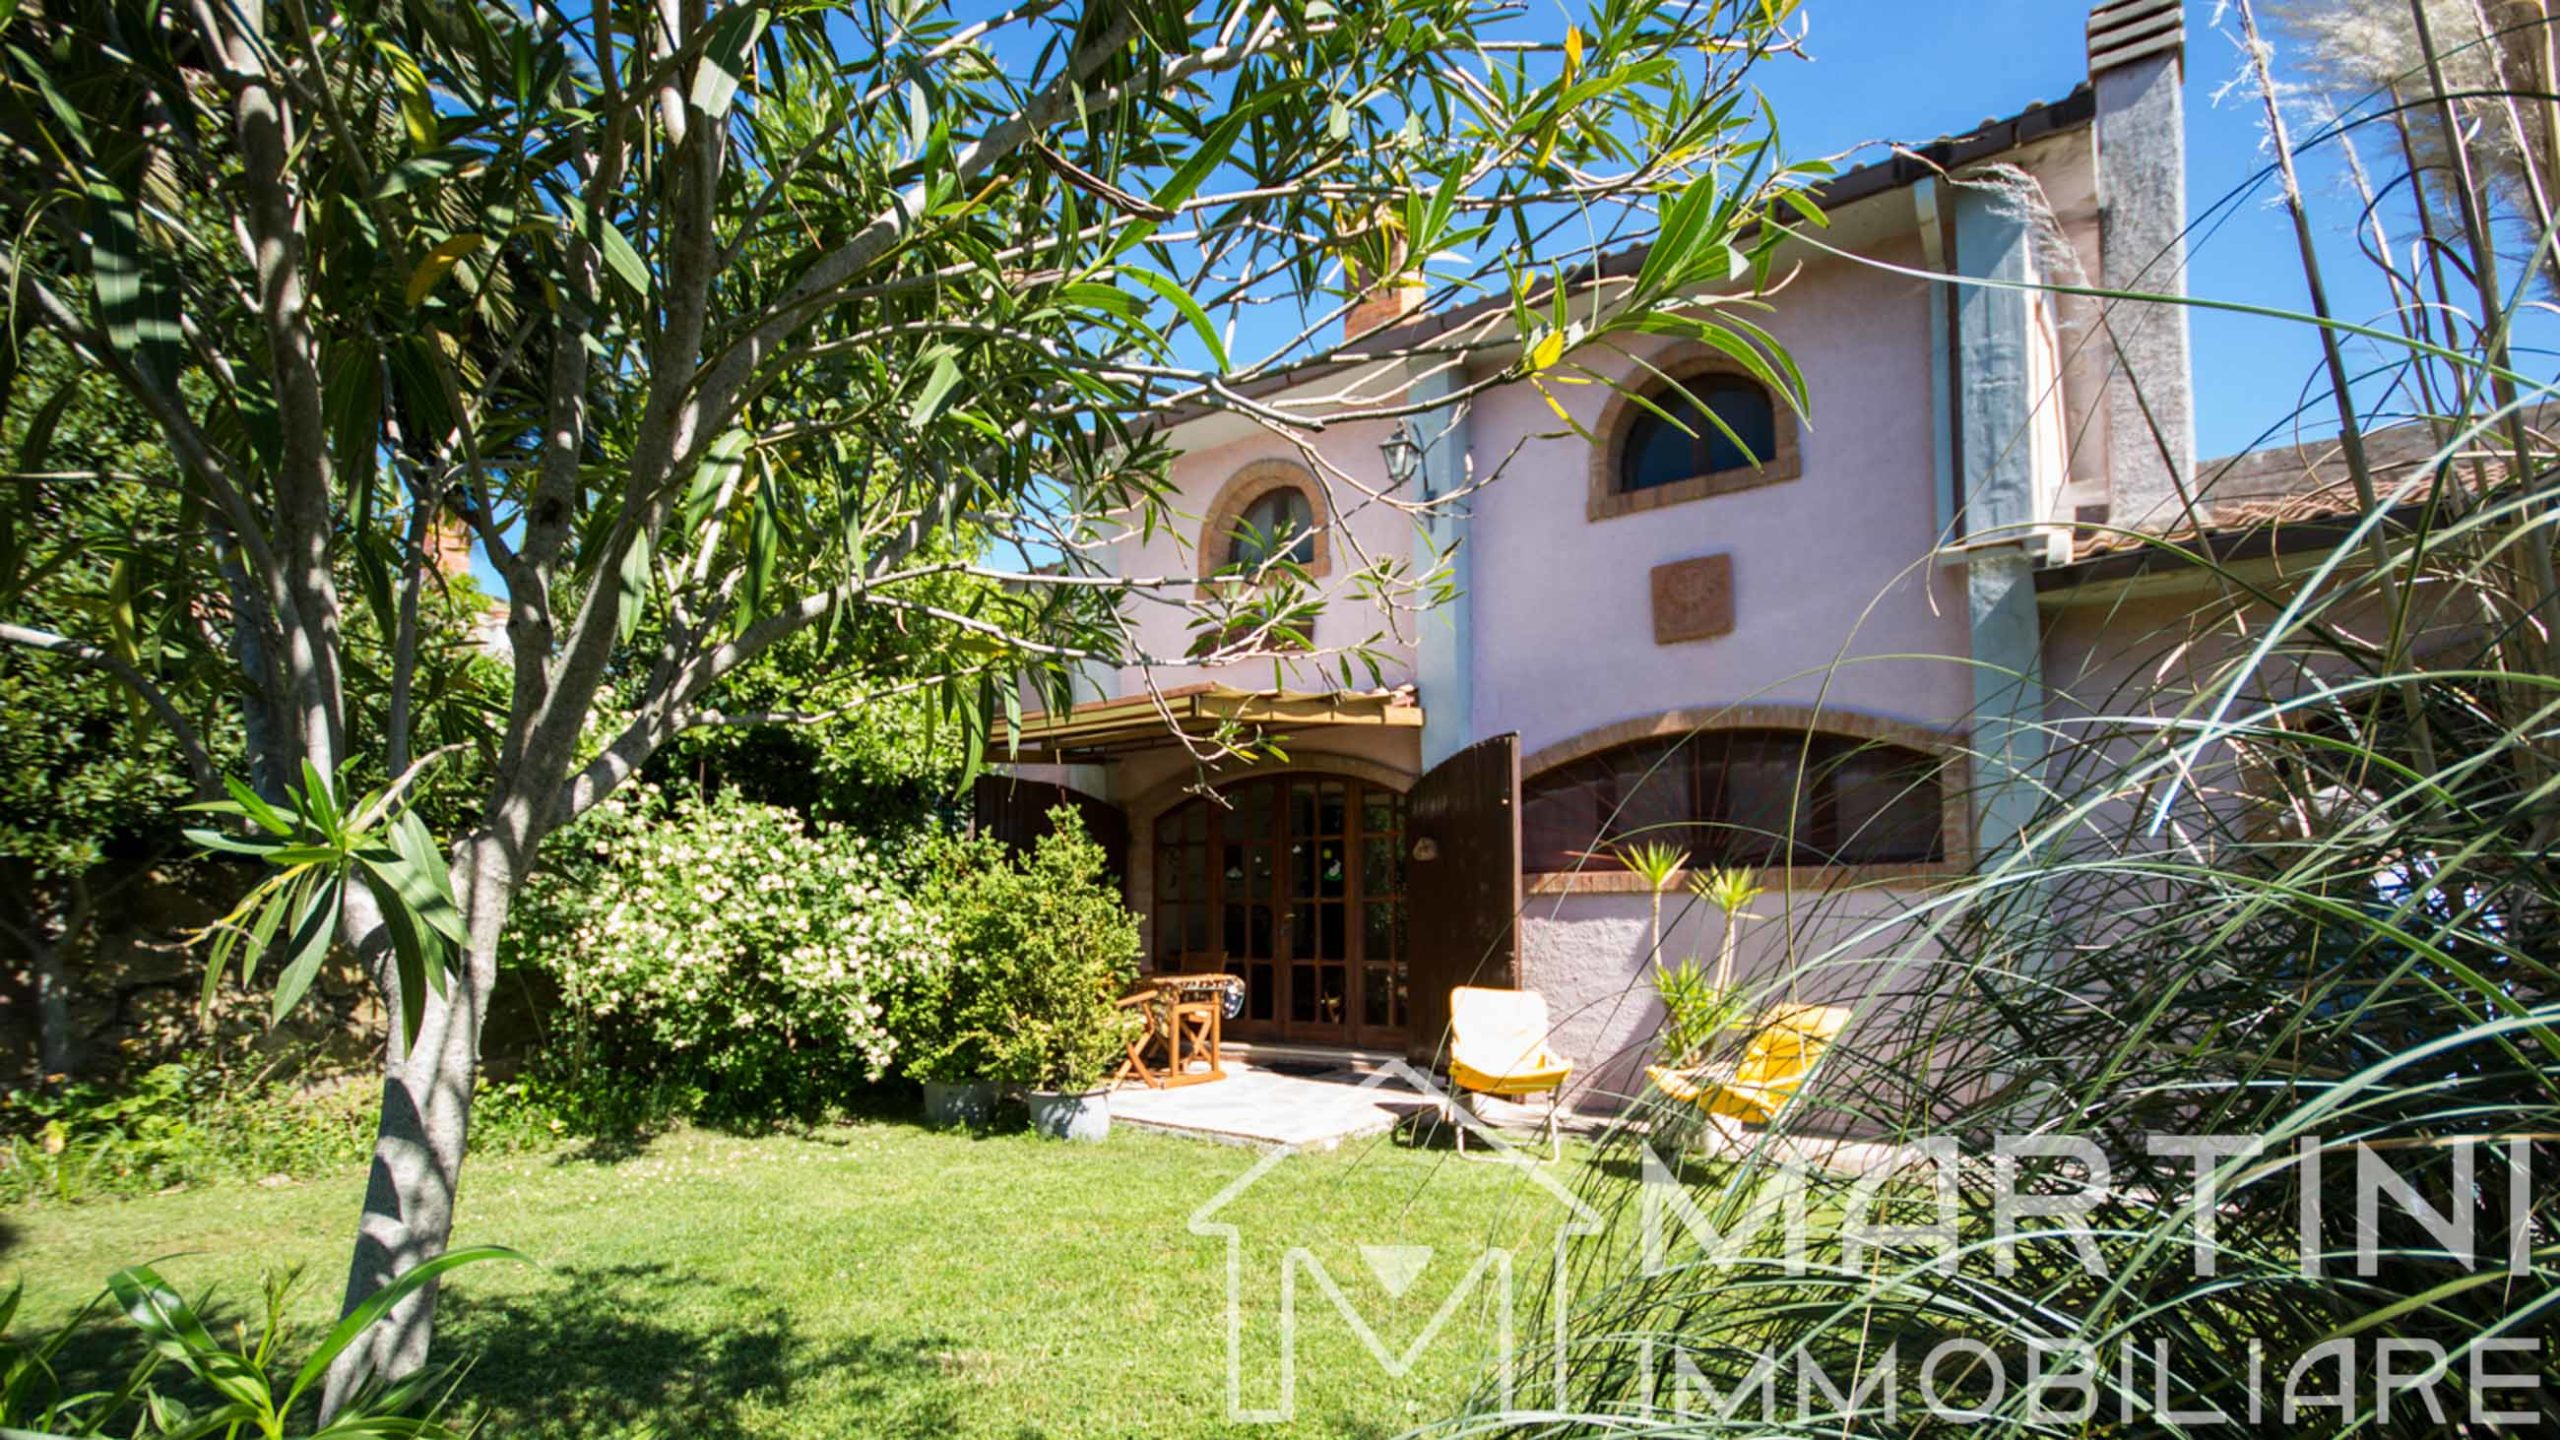 Apartment Rentals in Tuscany with Garden and Pool